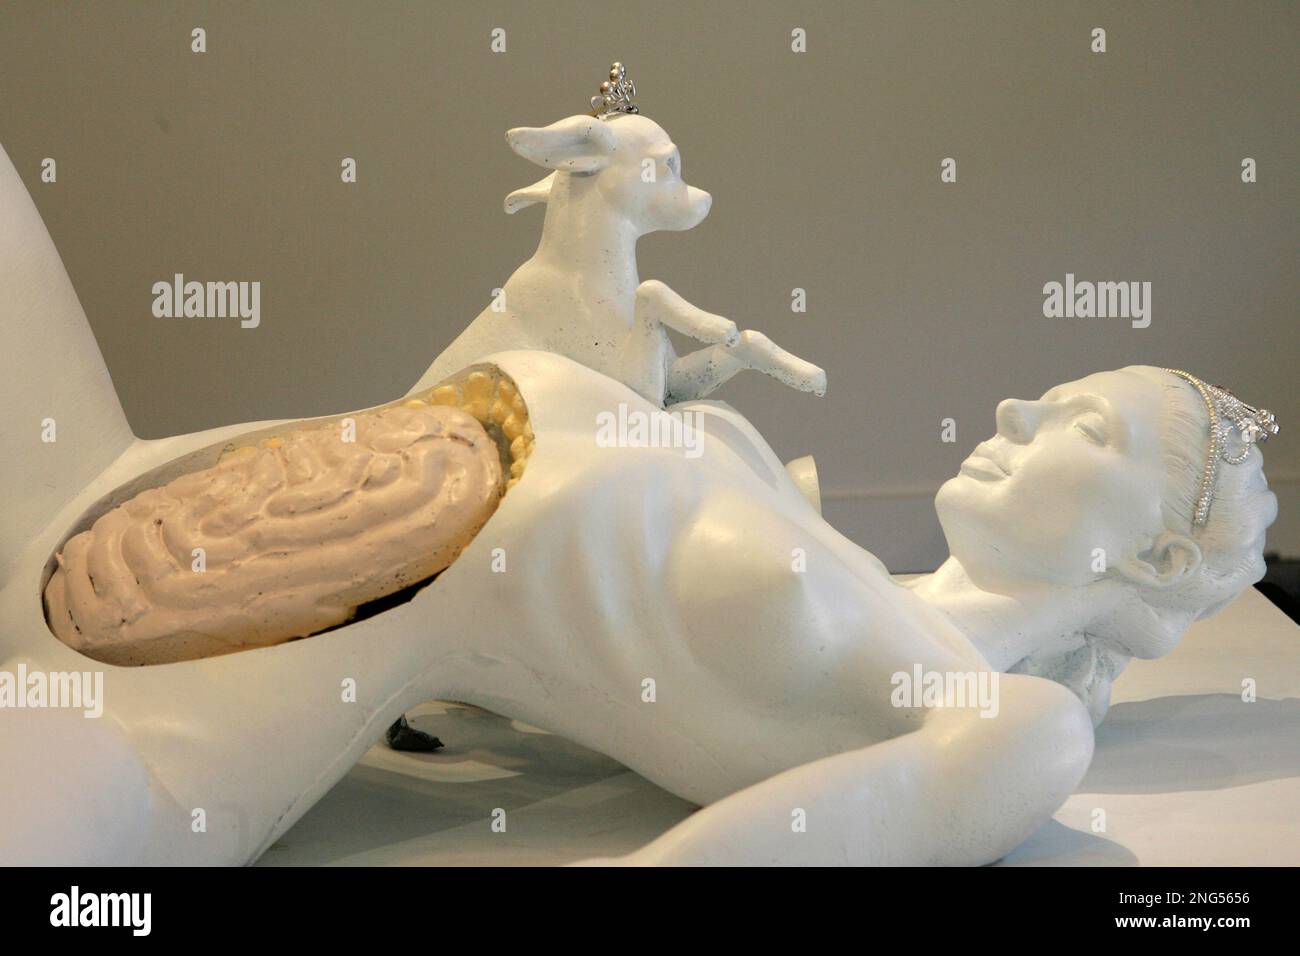 Daniel Edwards' "Paris Hilton Autopsy" is on display during the press preview at the Capla Kesting Fine Art gallery Wednesday, May 9, 2007 in New York. The sculpture will be on exhibit to the public May 11 through May 30 at the gallery in the Williamsburg neighborhood of Brooklyn . (AP Photo/Mary Altaffer) Stock Photo